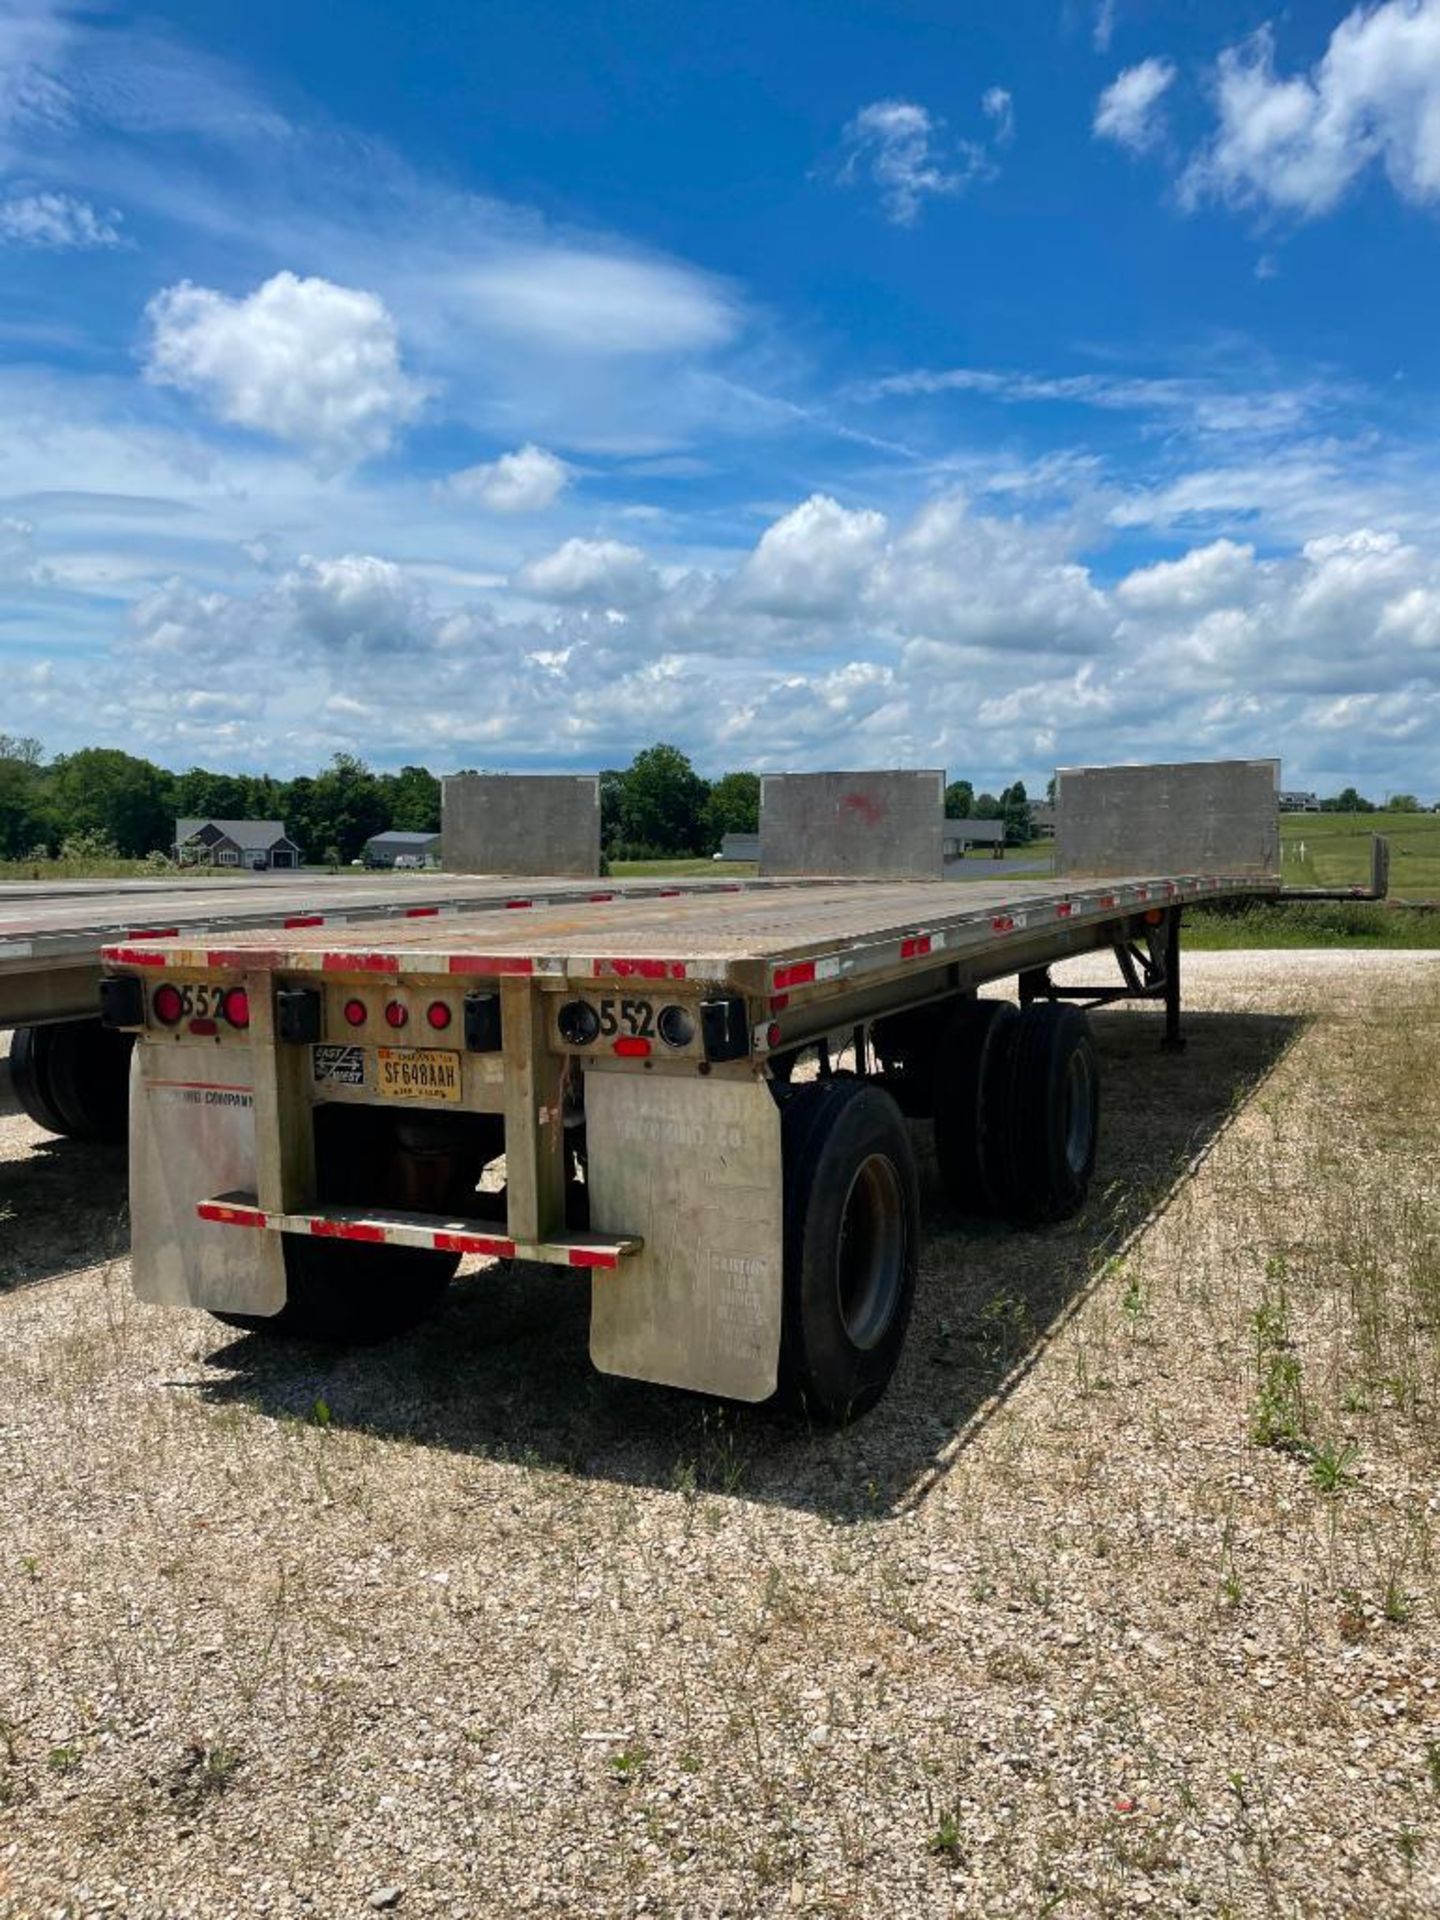 1987 RAVENS 42' ALUMINUM FLATBED TRAILER, DUAL TANDEM SPREAD AXLE, MODEL 54241, WITH HEADACHE - Image 2 of 2